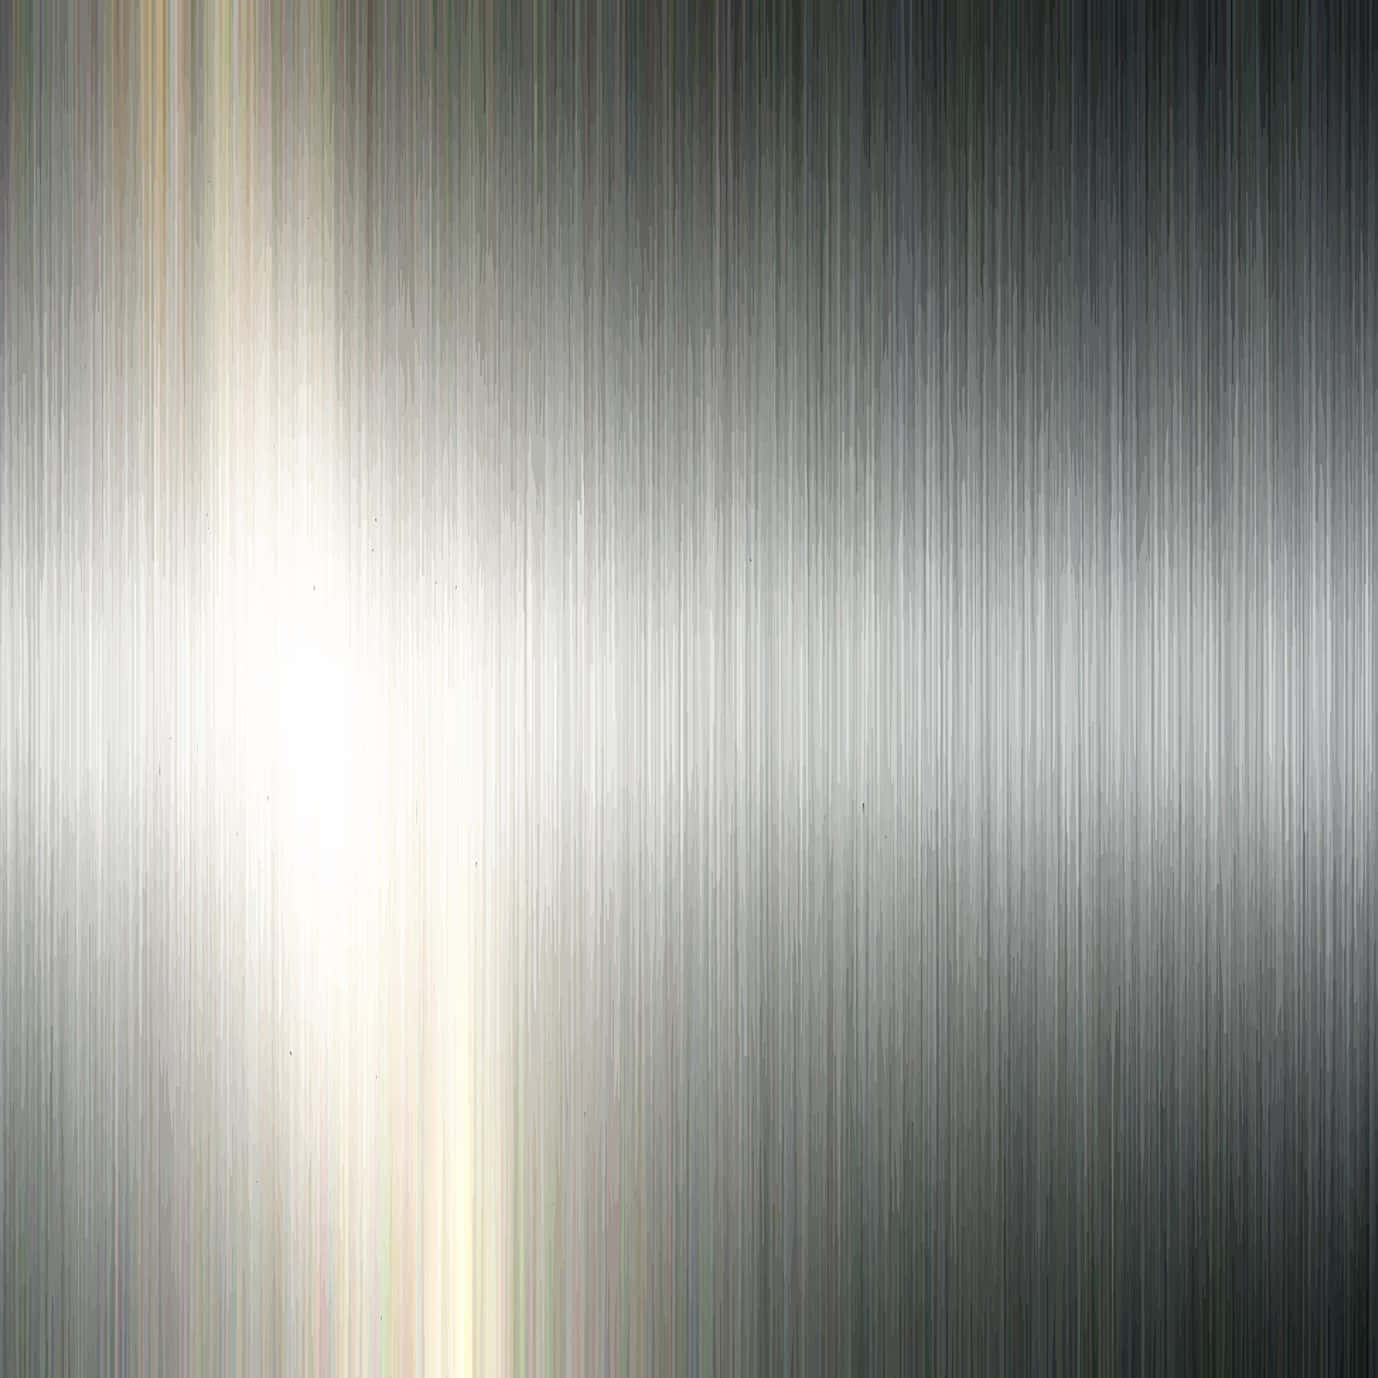 Polished Steel Background Texture